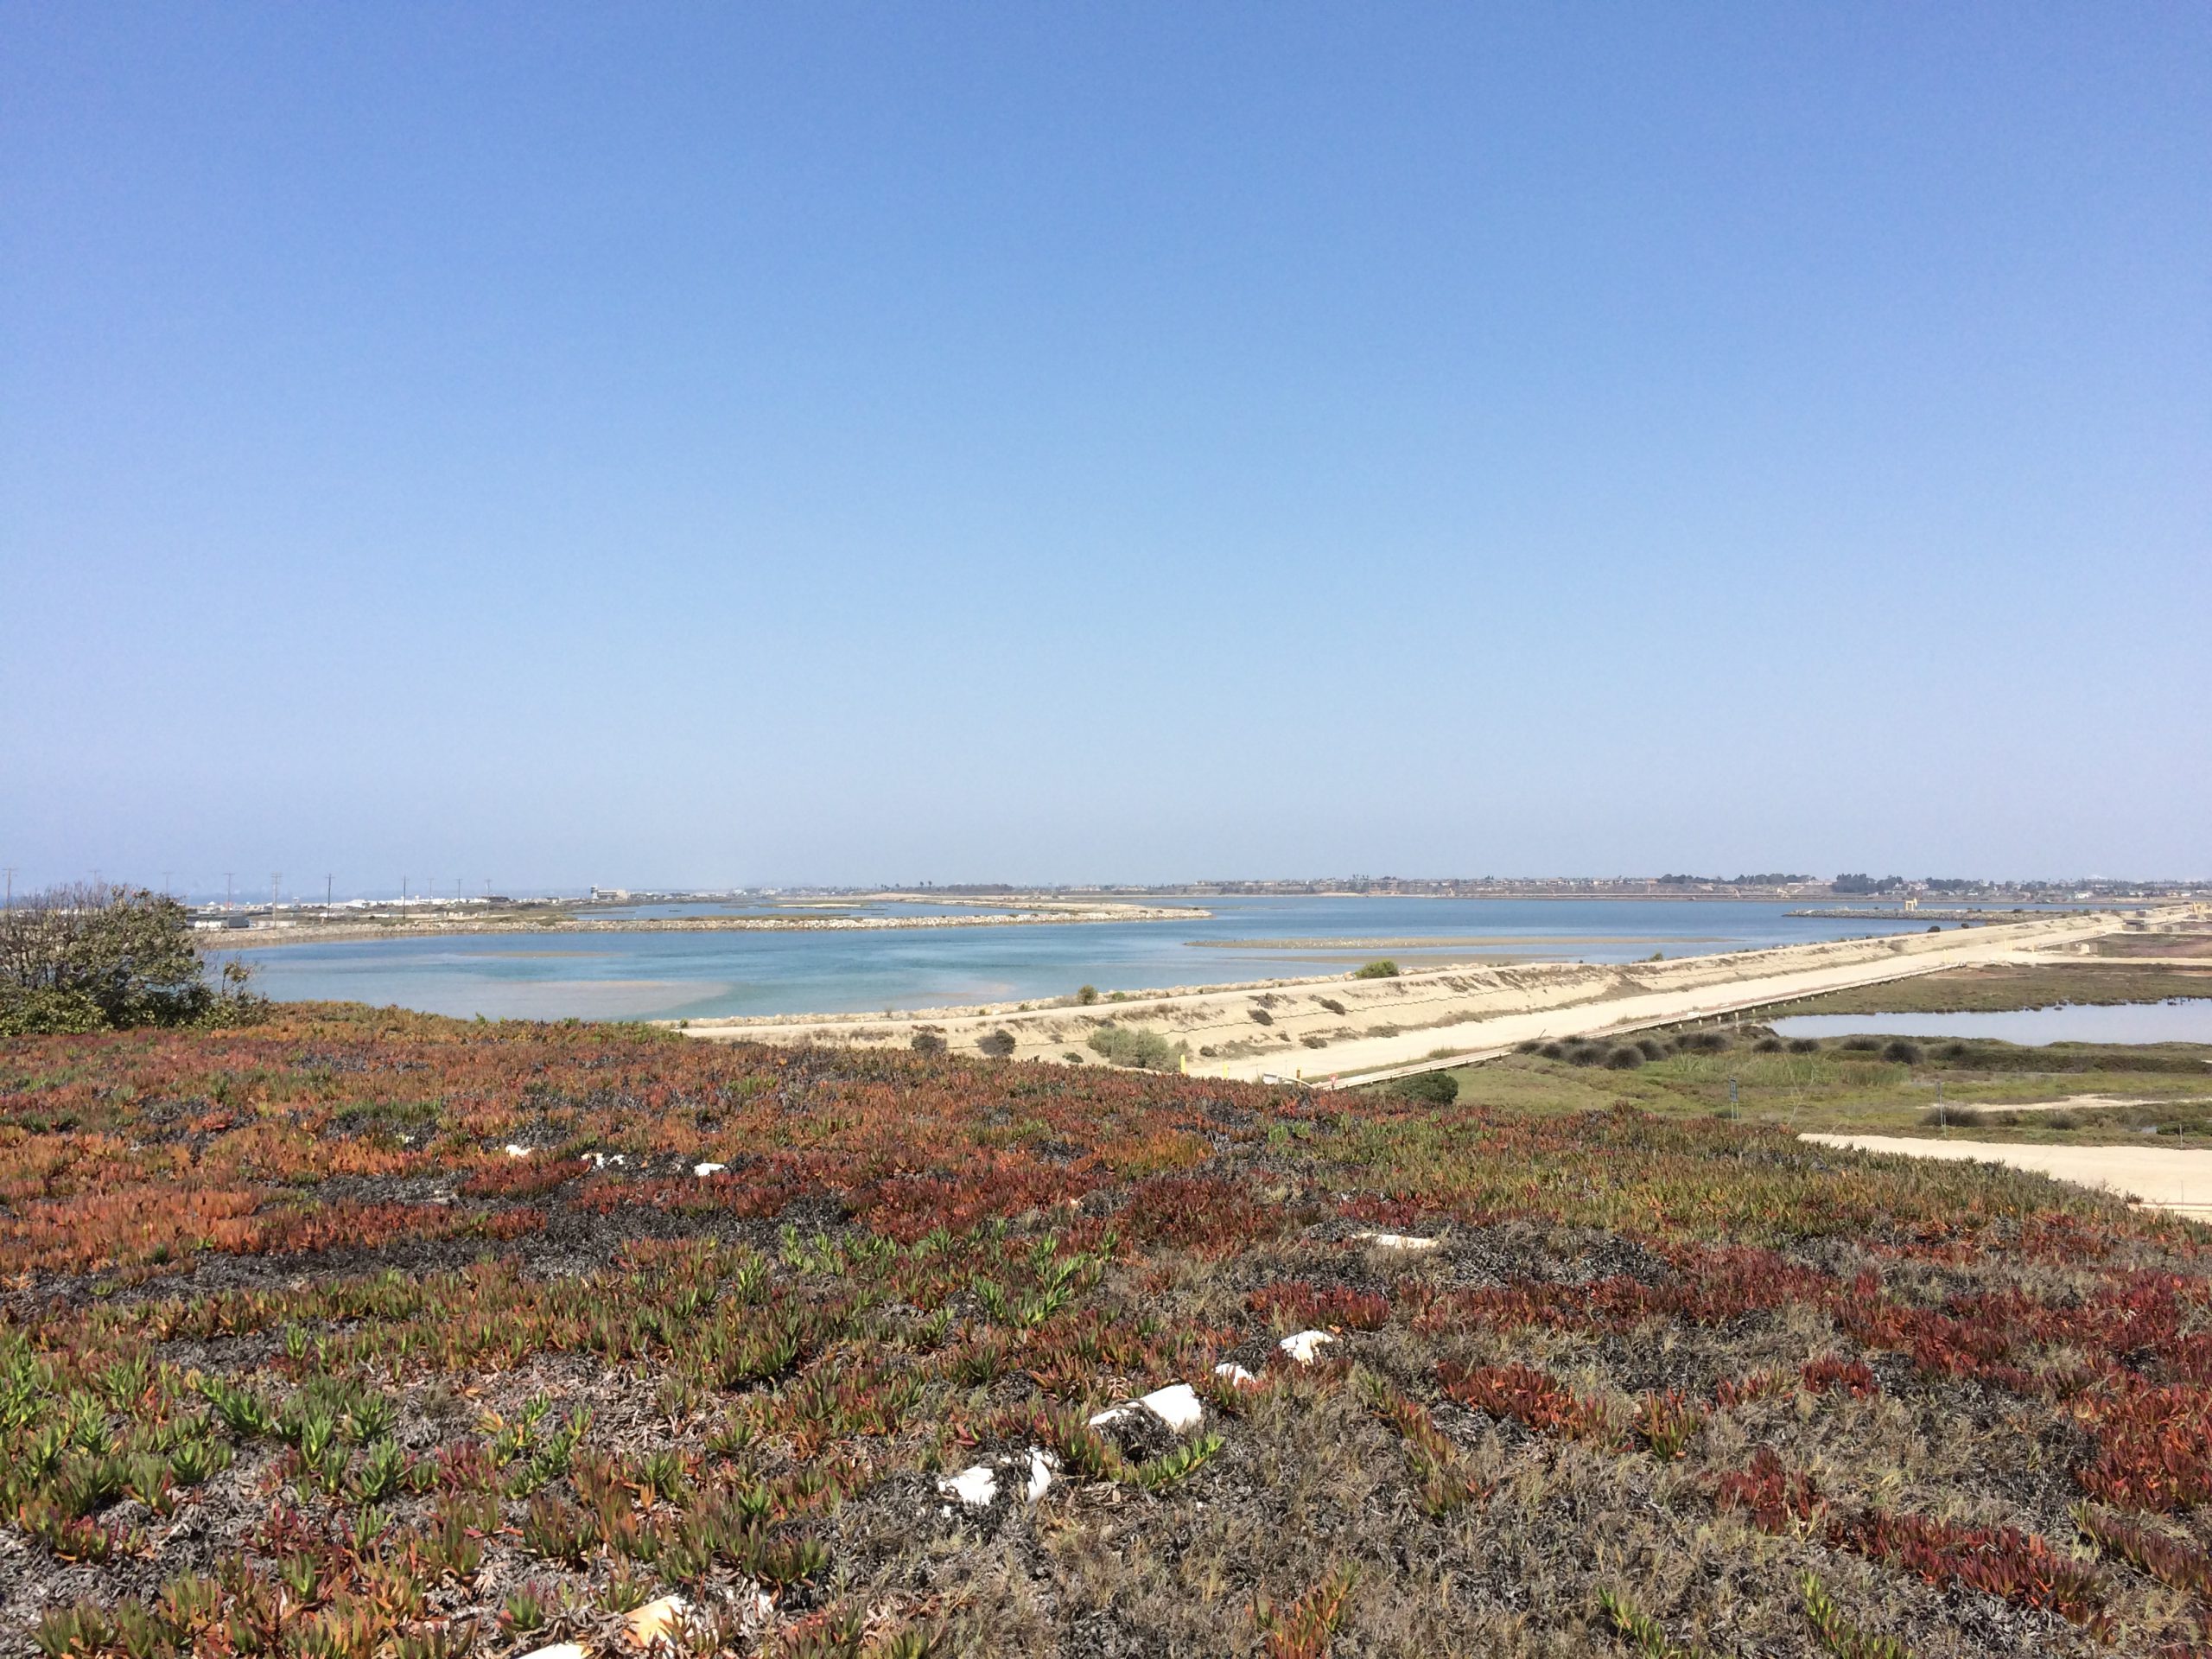 View of the wetlands from the parking lot at Bolsa Chica.